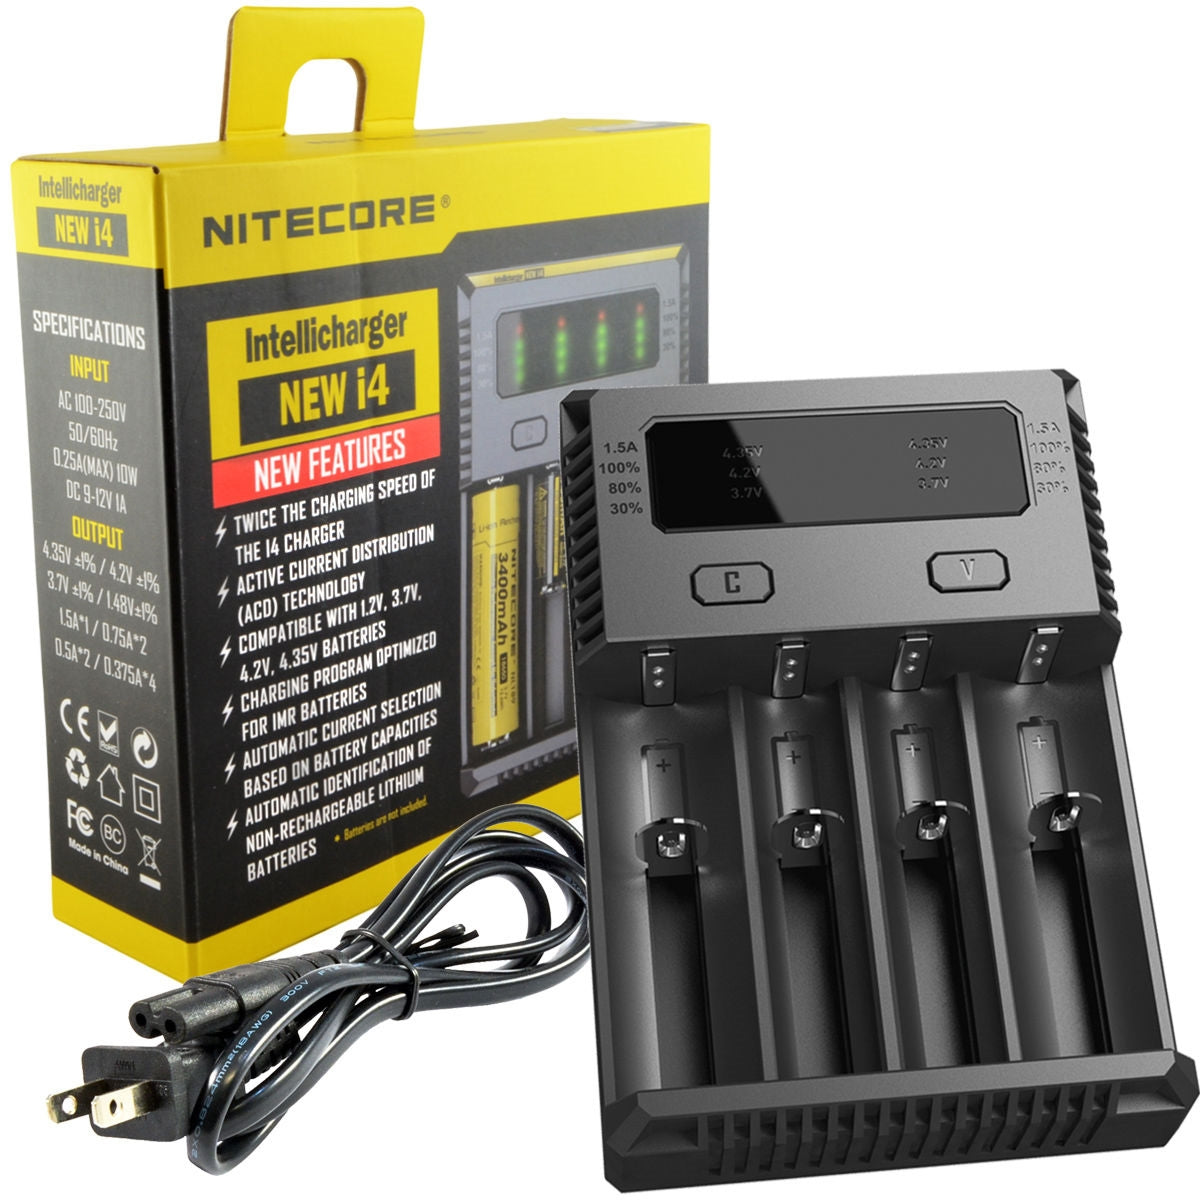 Nitecore i4 4 Channel Battery Charger